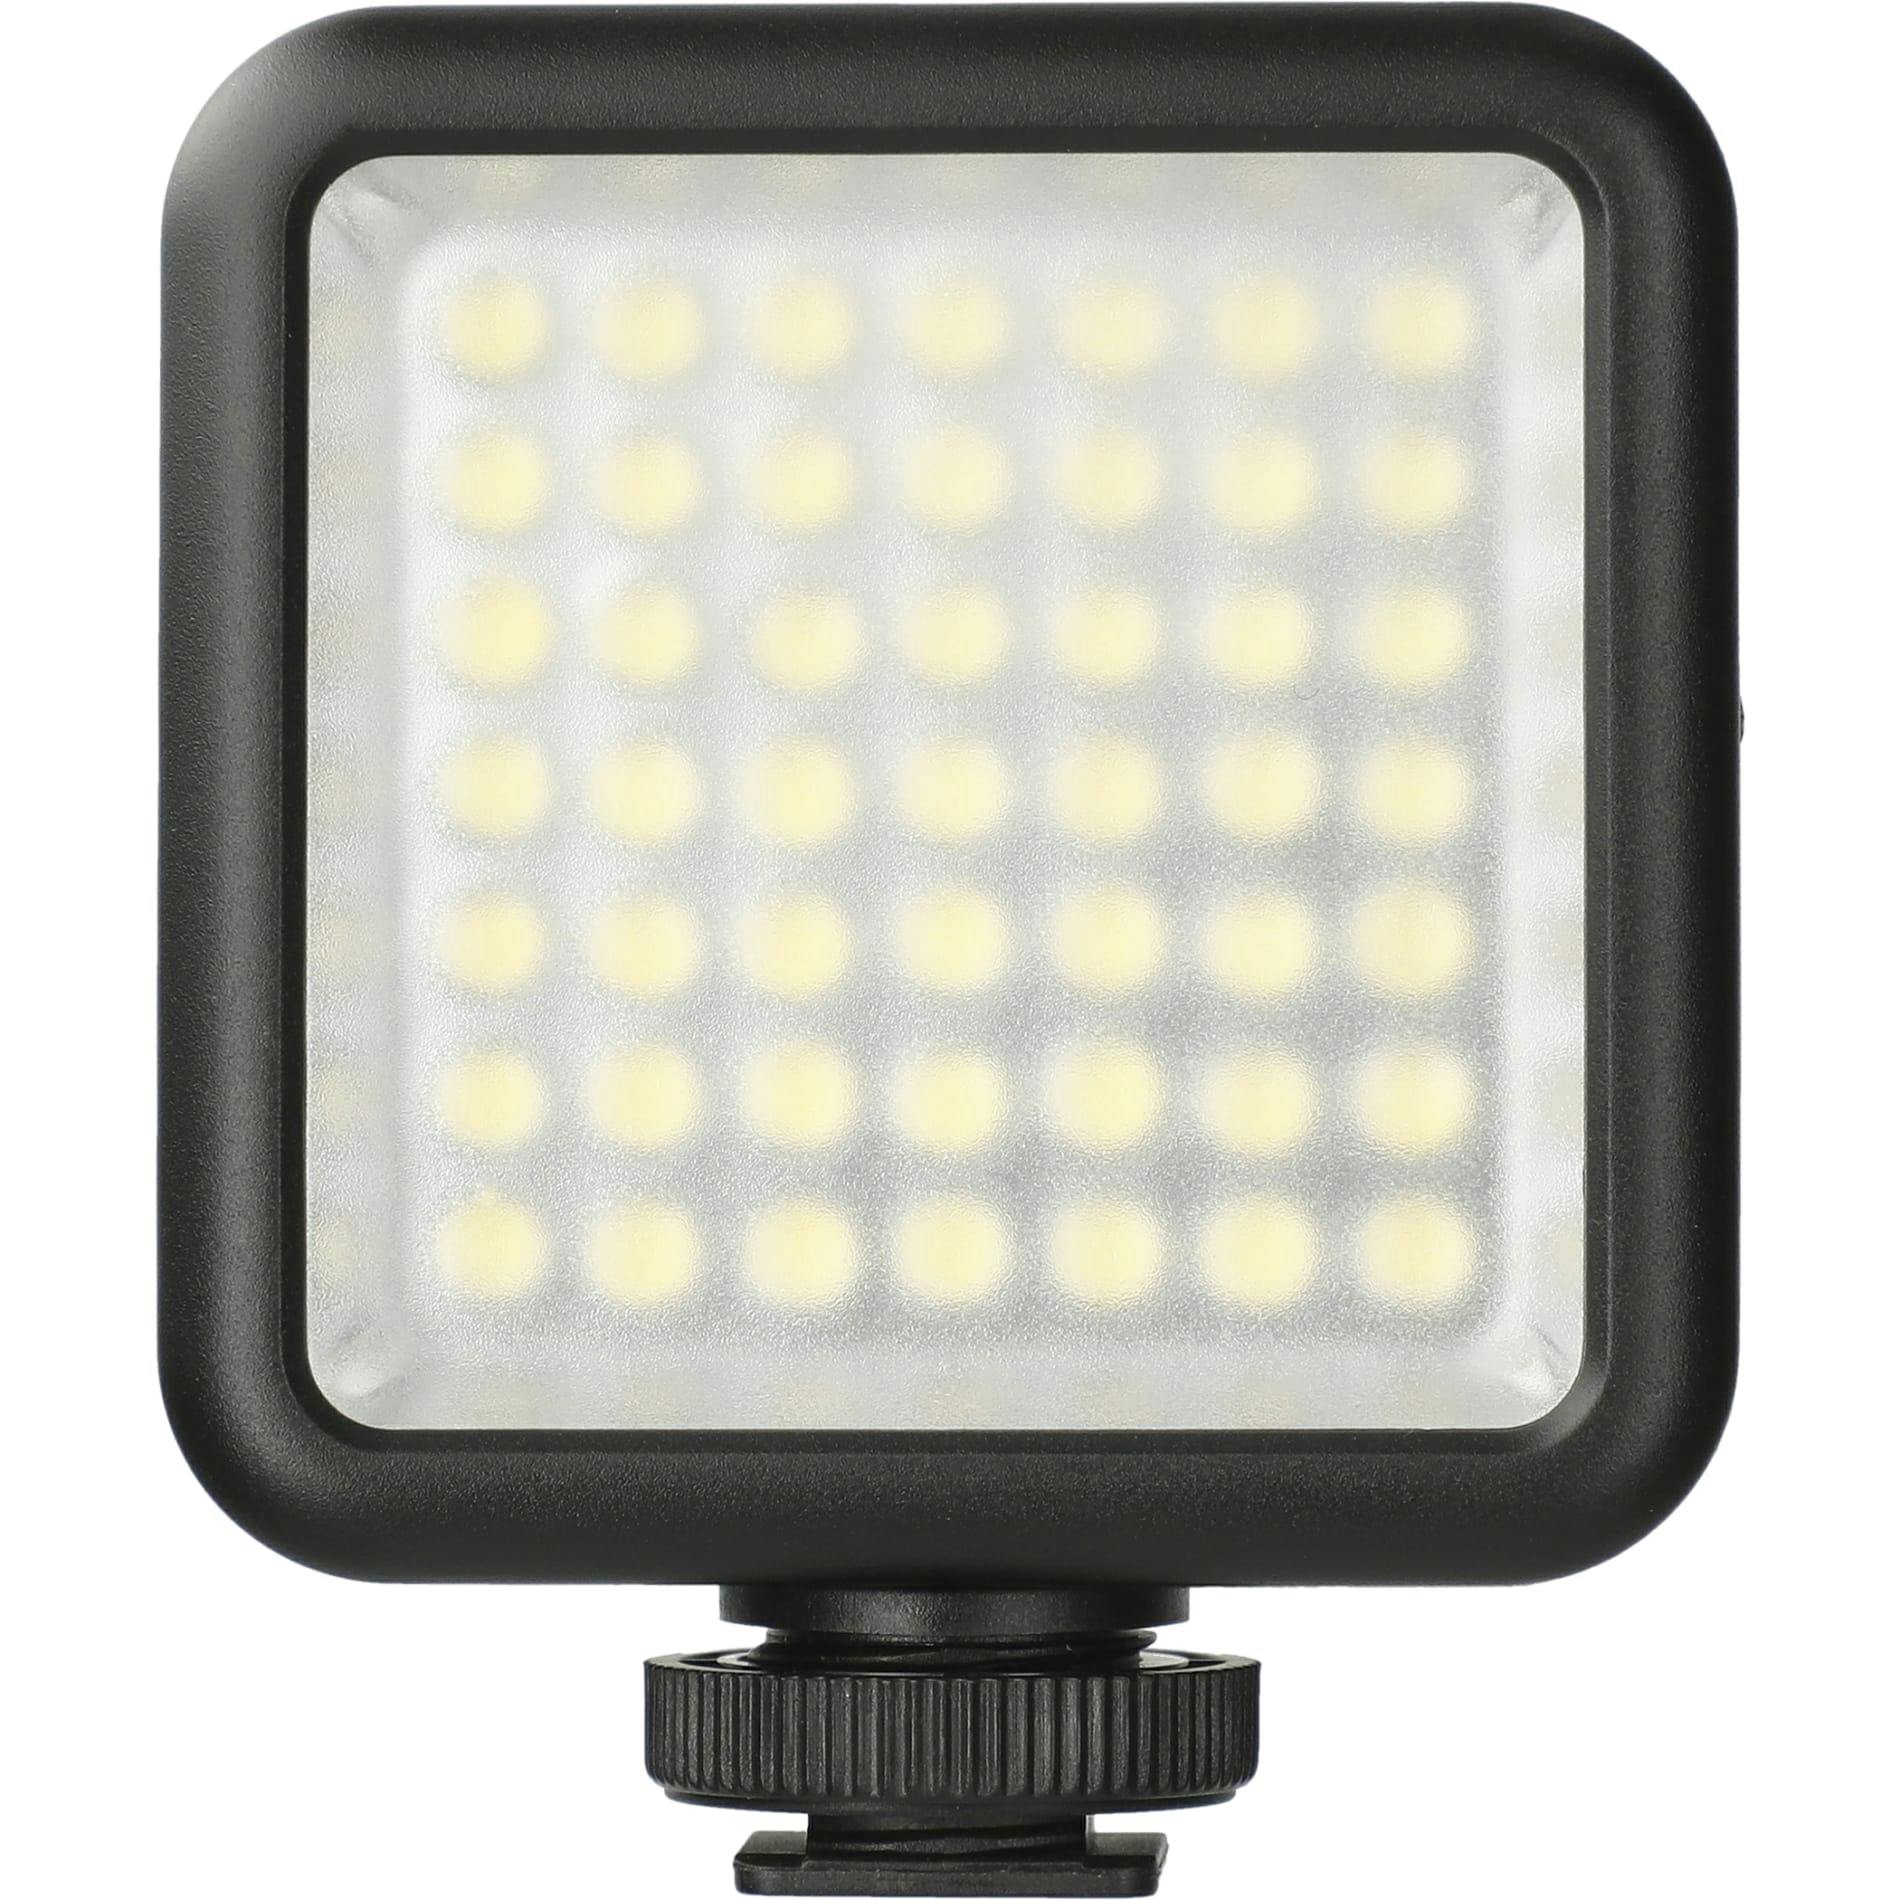 Laptop & Tablet Portable Video Light - additional Image 3